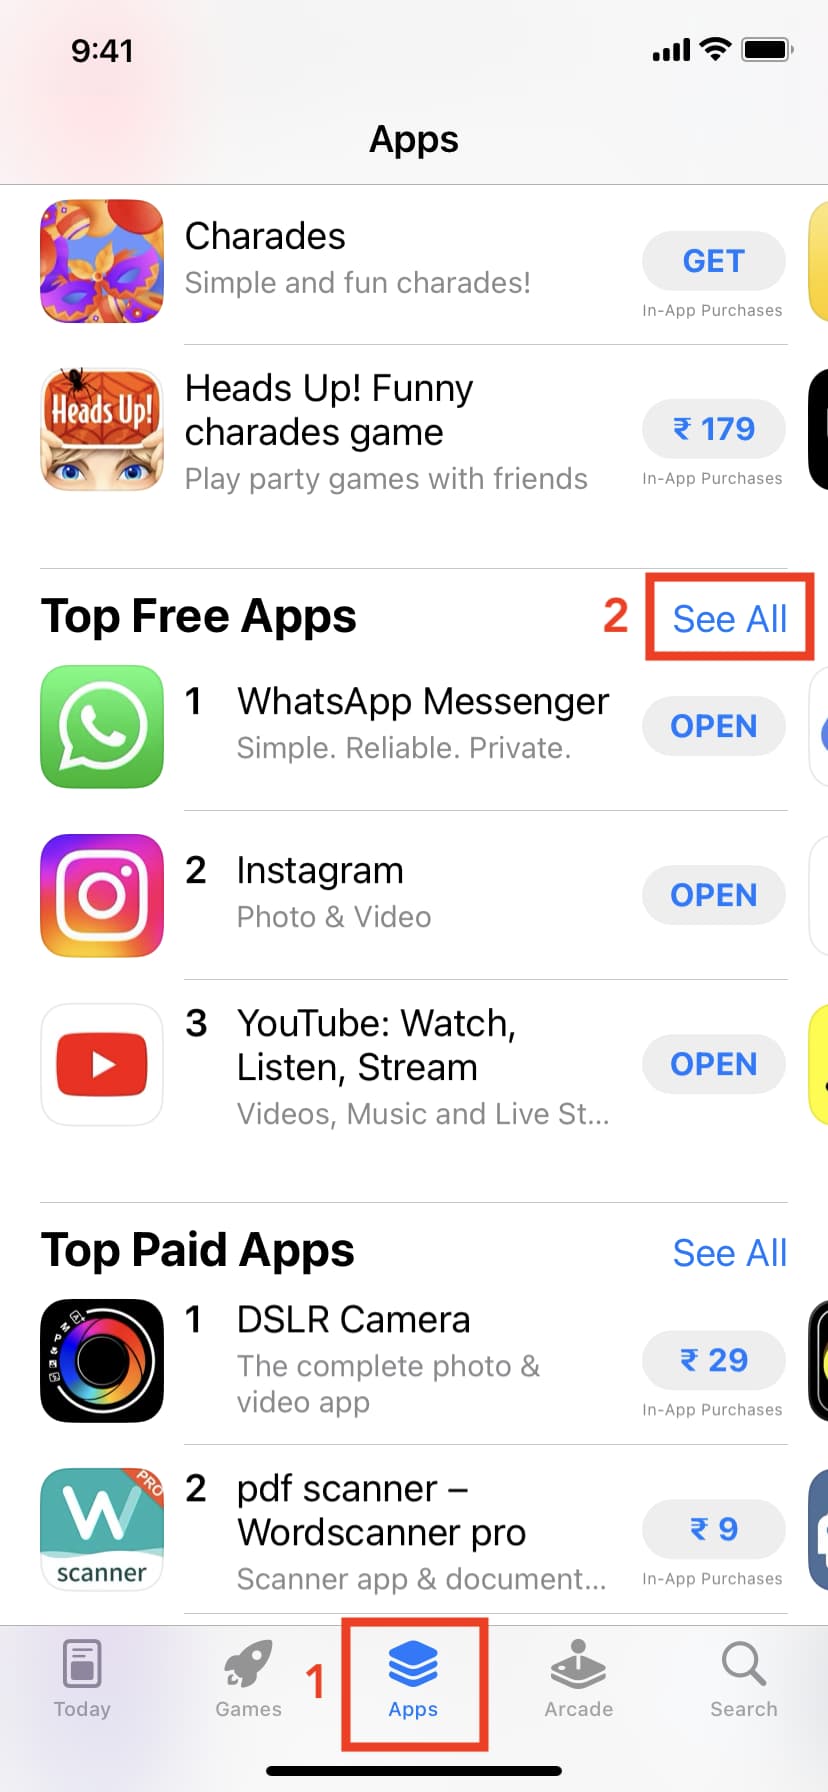 See all the top free apps on the iPhone App Store